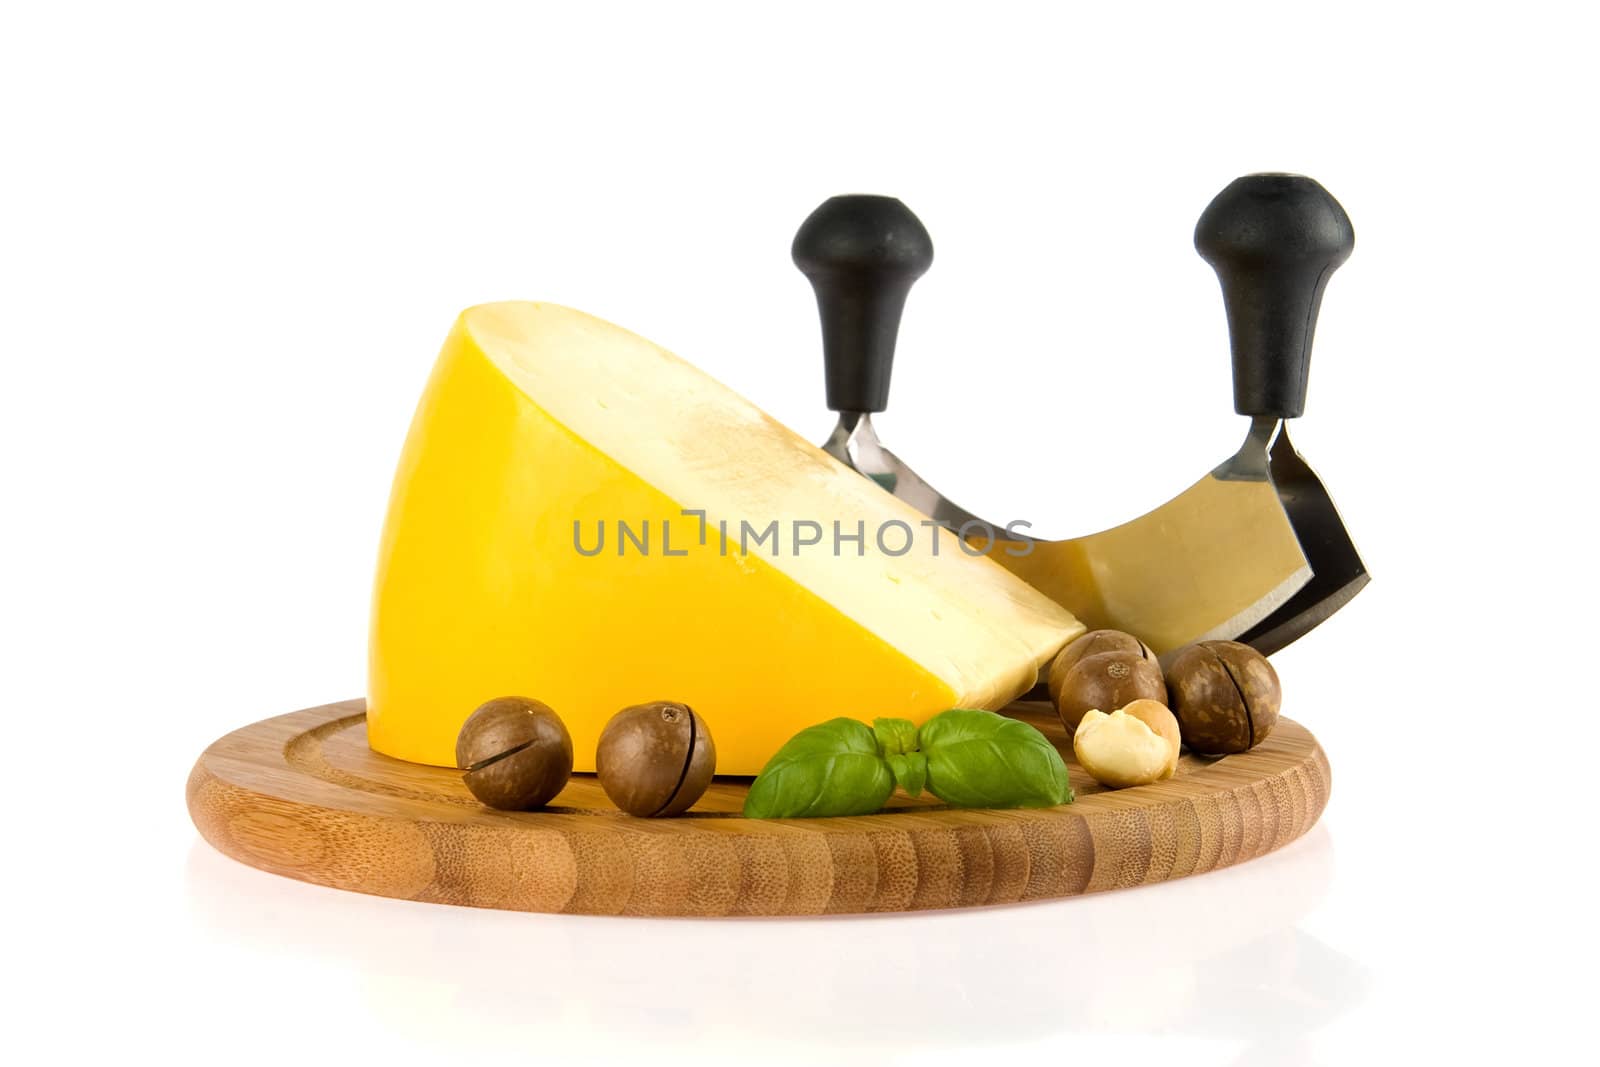 a kilogramm cheese, a cheese slicer and nuts